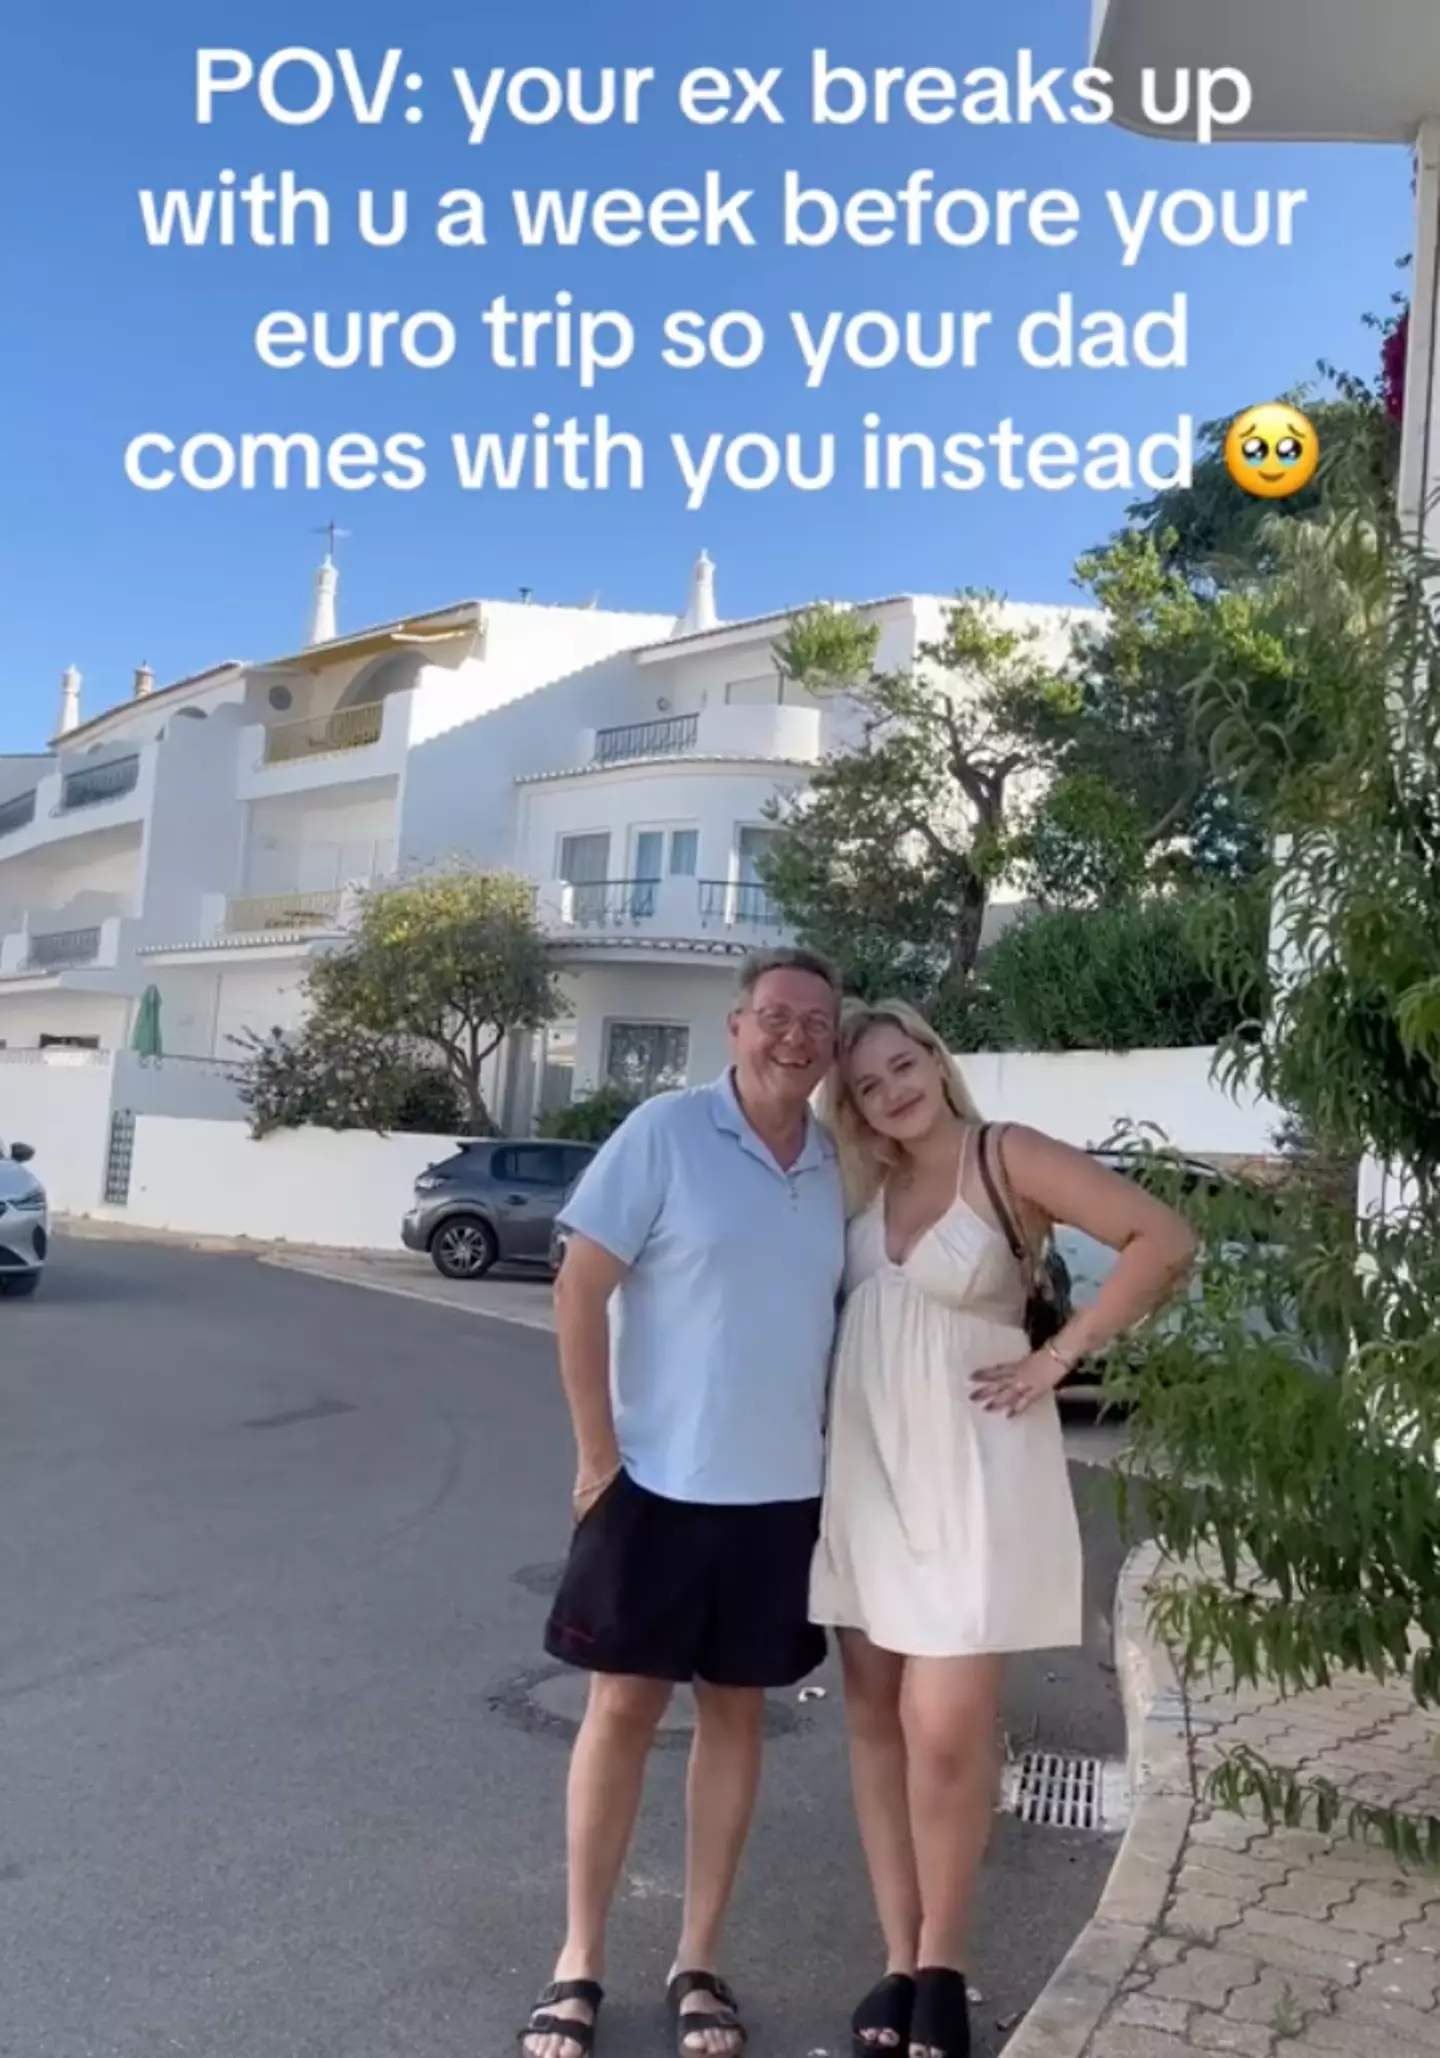 Emma's dad joined her on the trip instead.